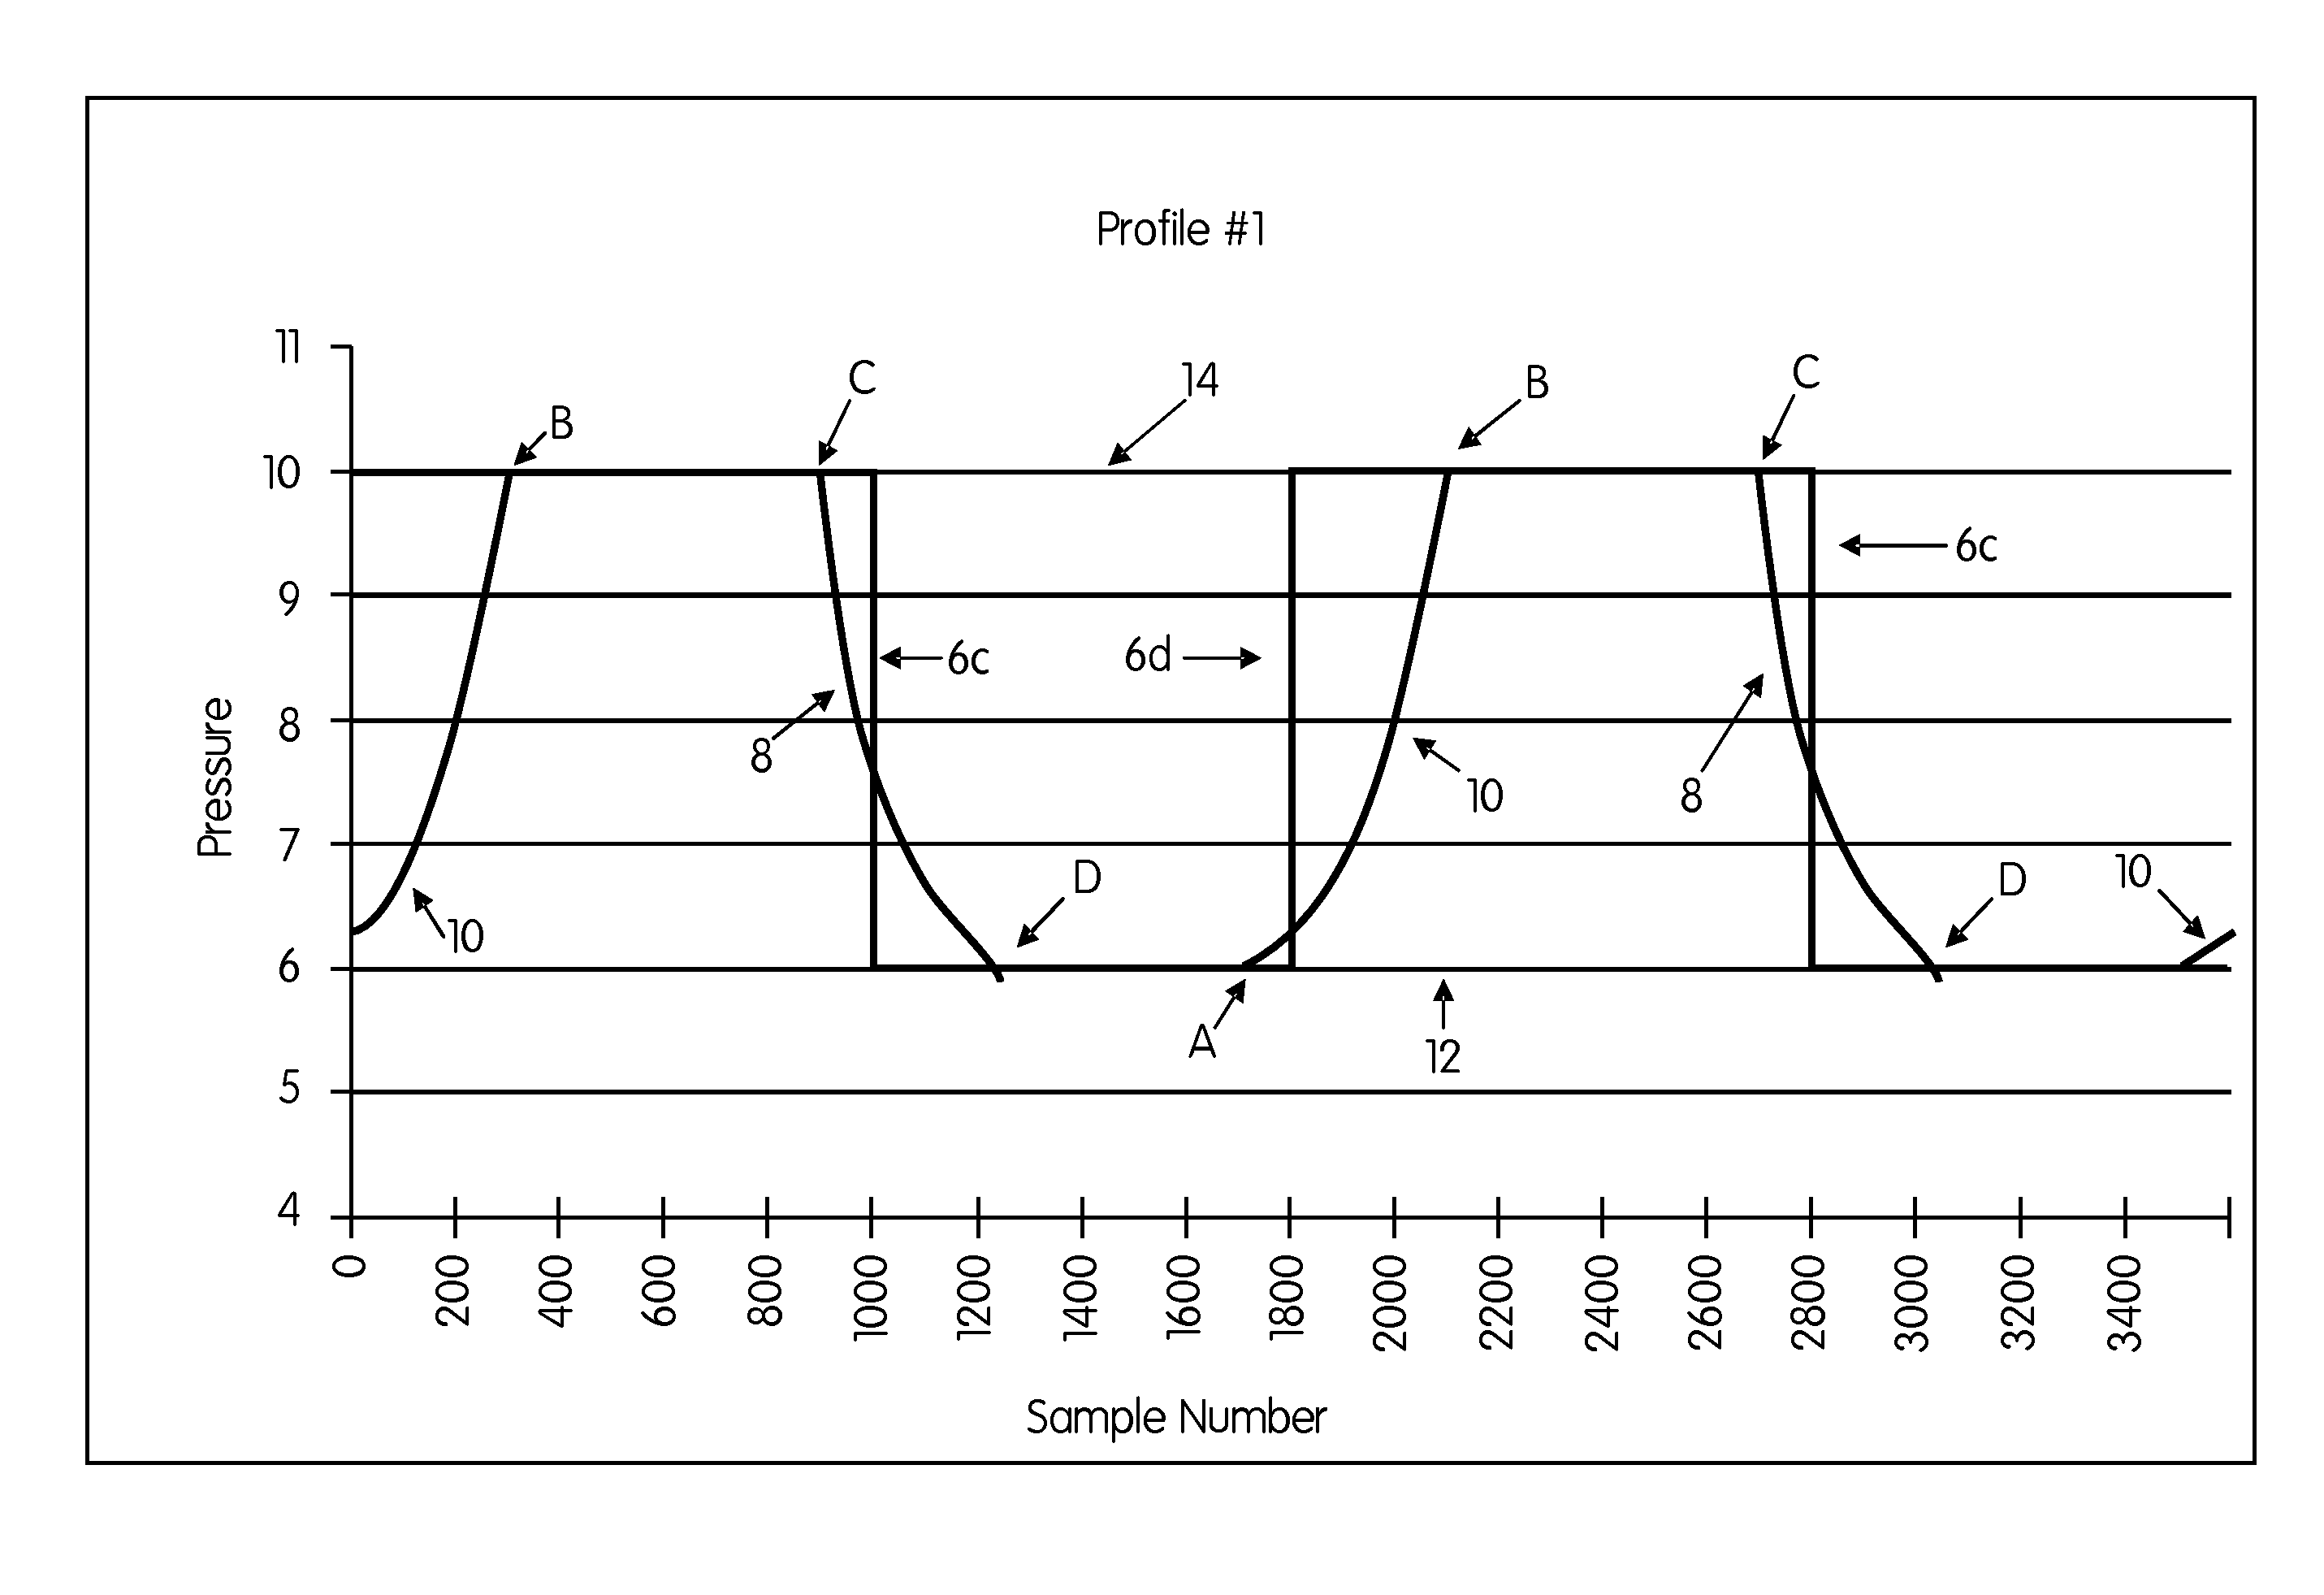 Variable transition pressure profiles for a bi-level breathing therapy machine